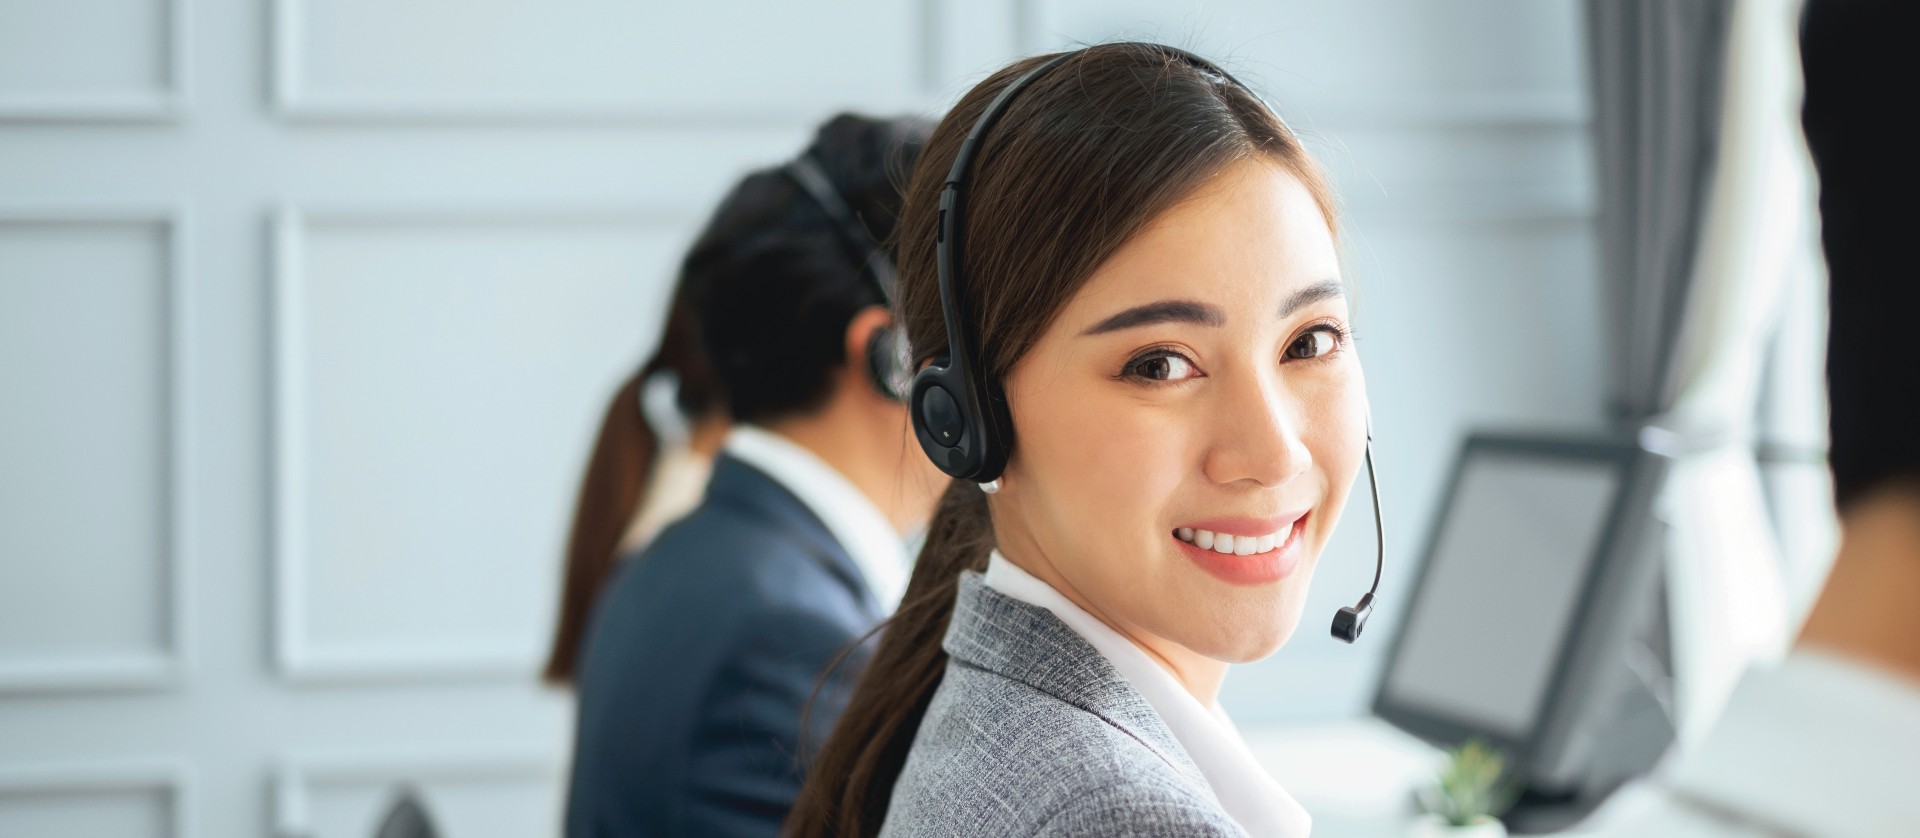 Call Center Rep with Headphones Smiling at the Camera